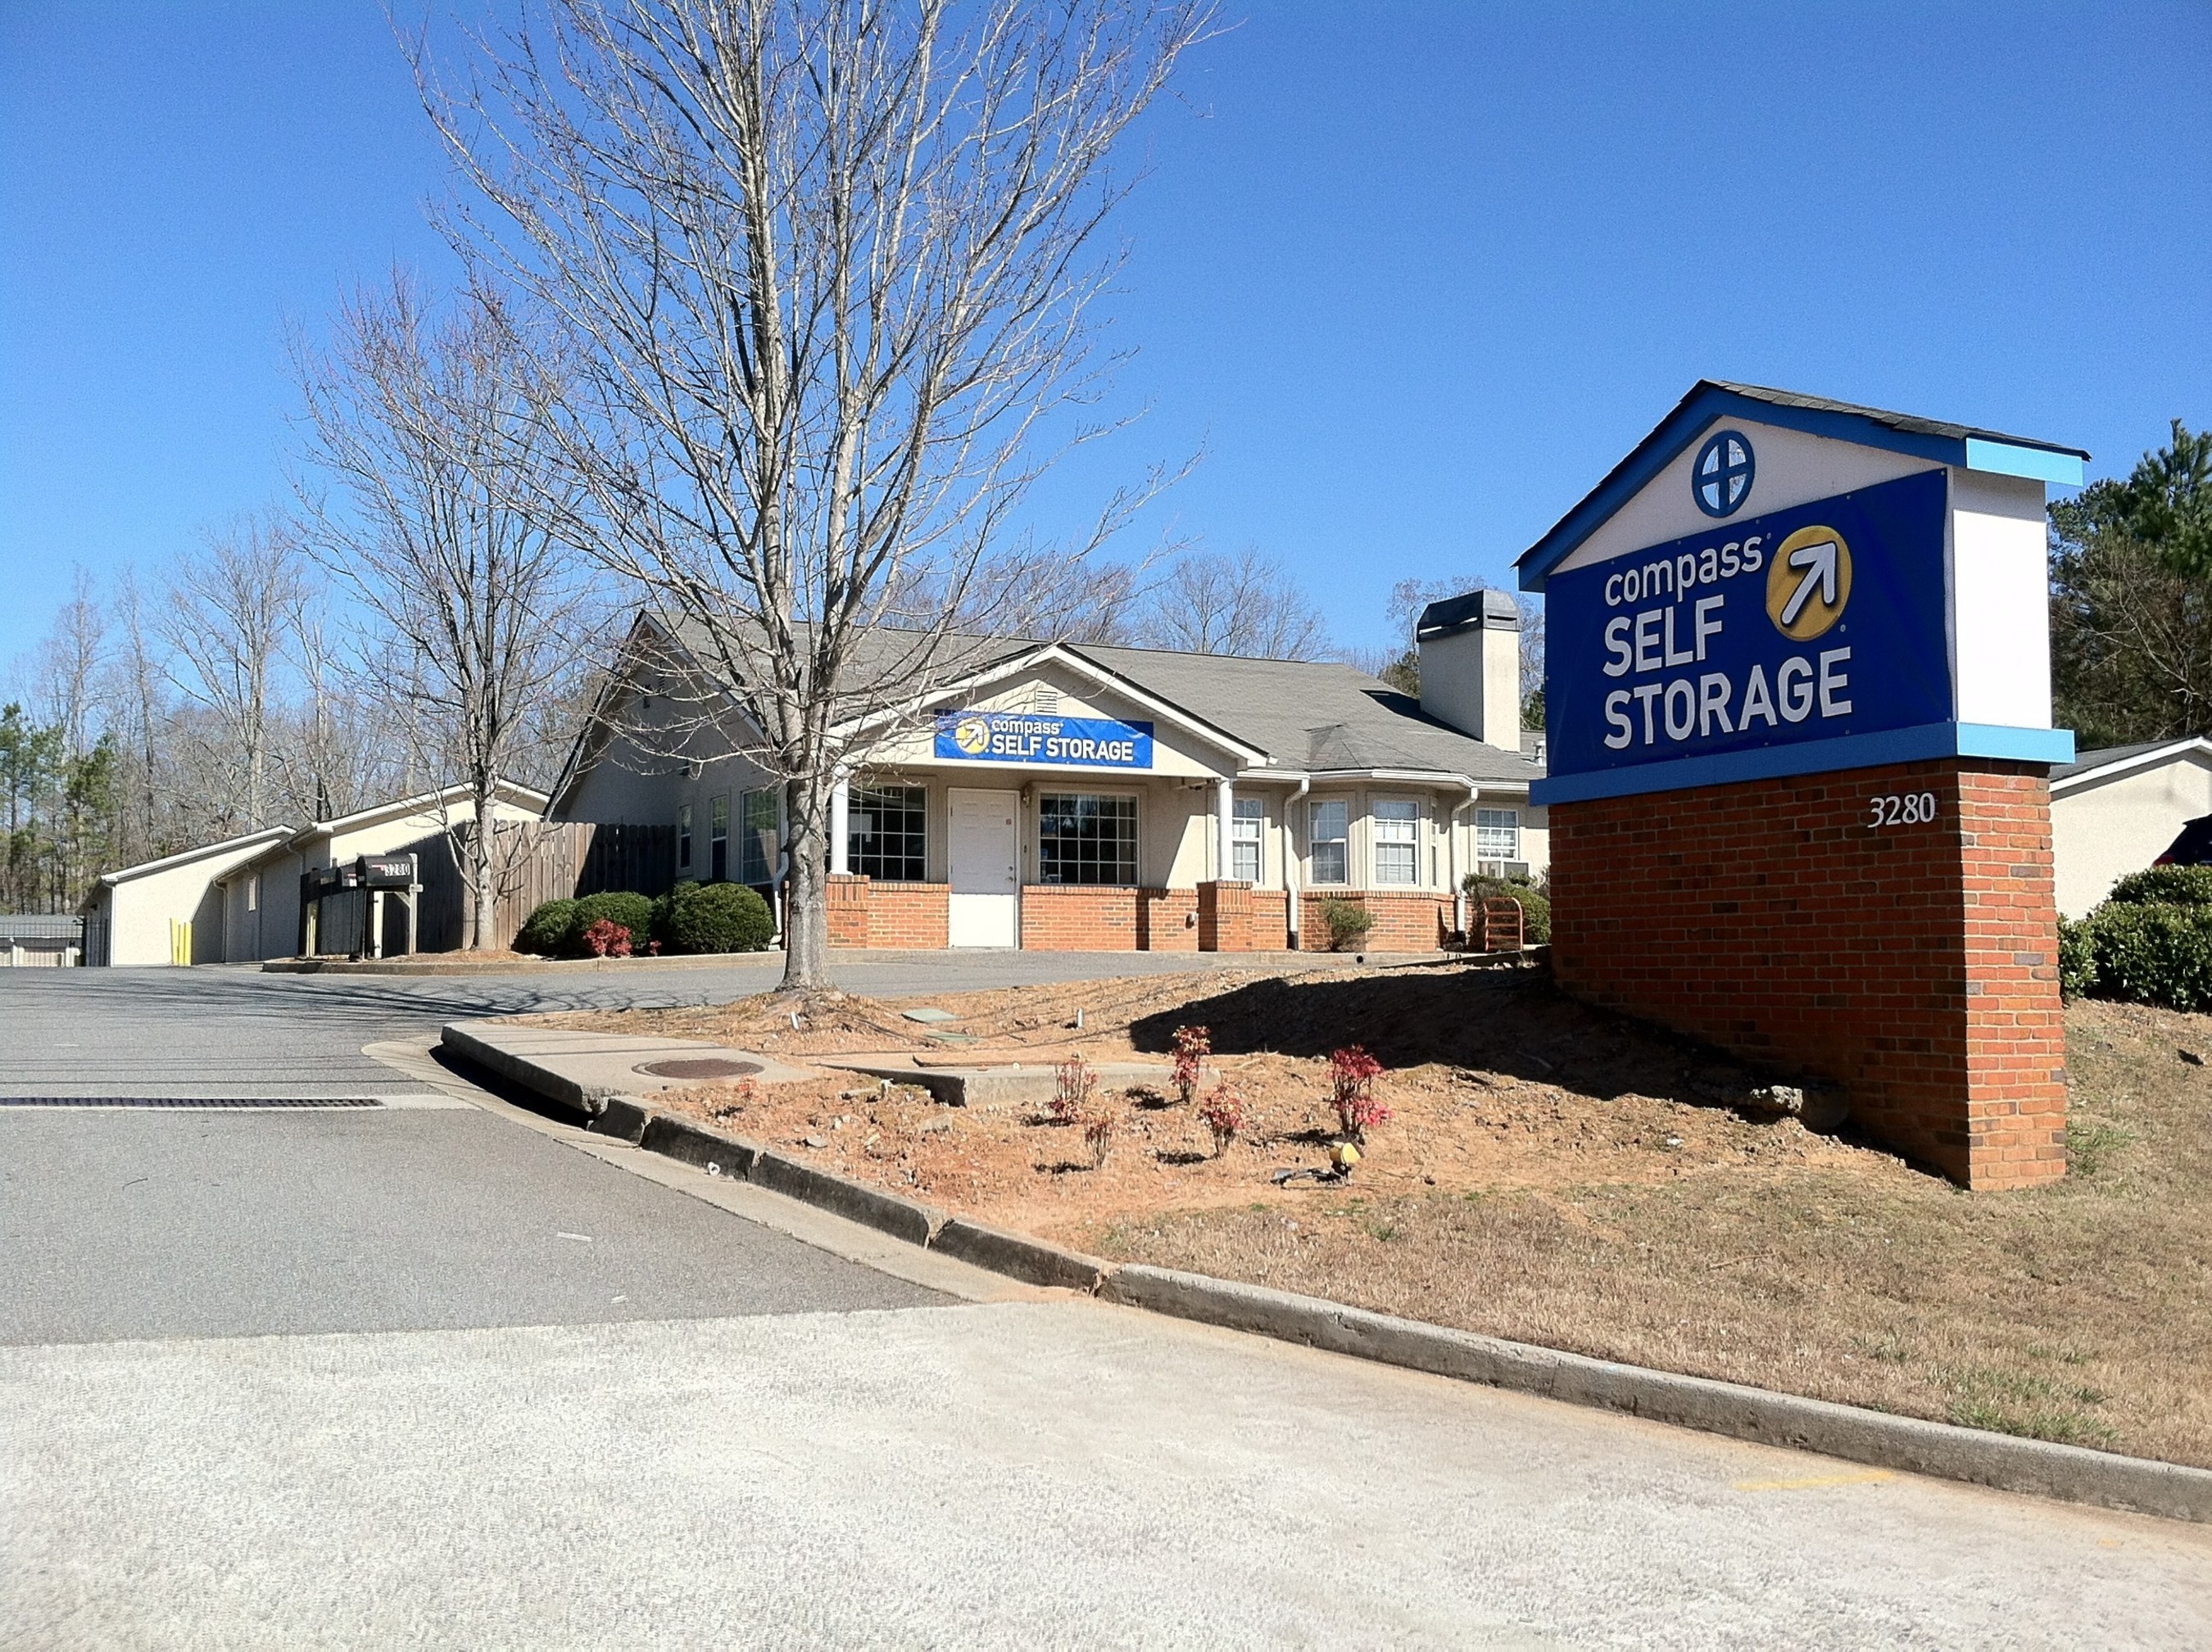 Compass Self Storage recently acquired two self storage properties in the greater Atlanta area.